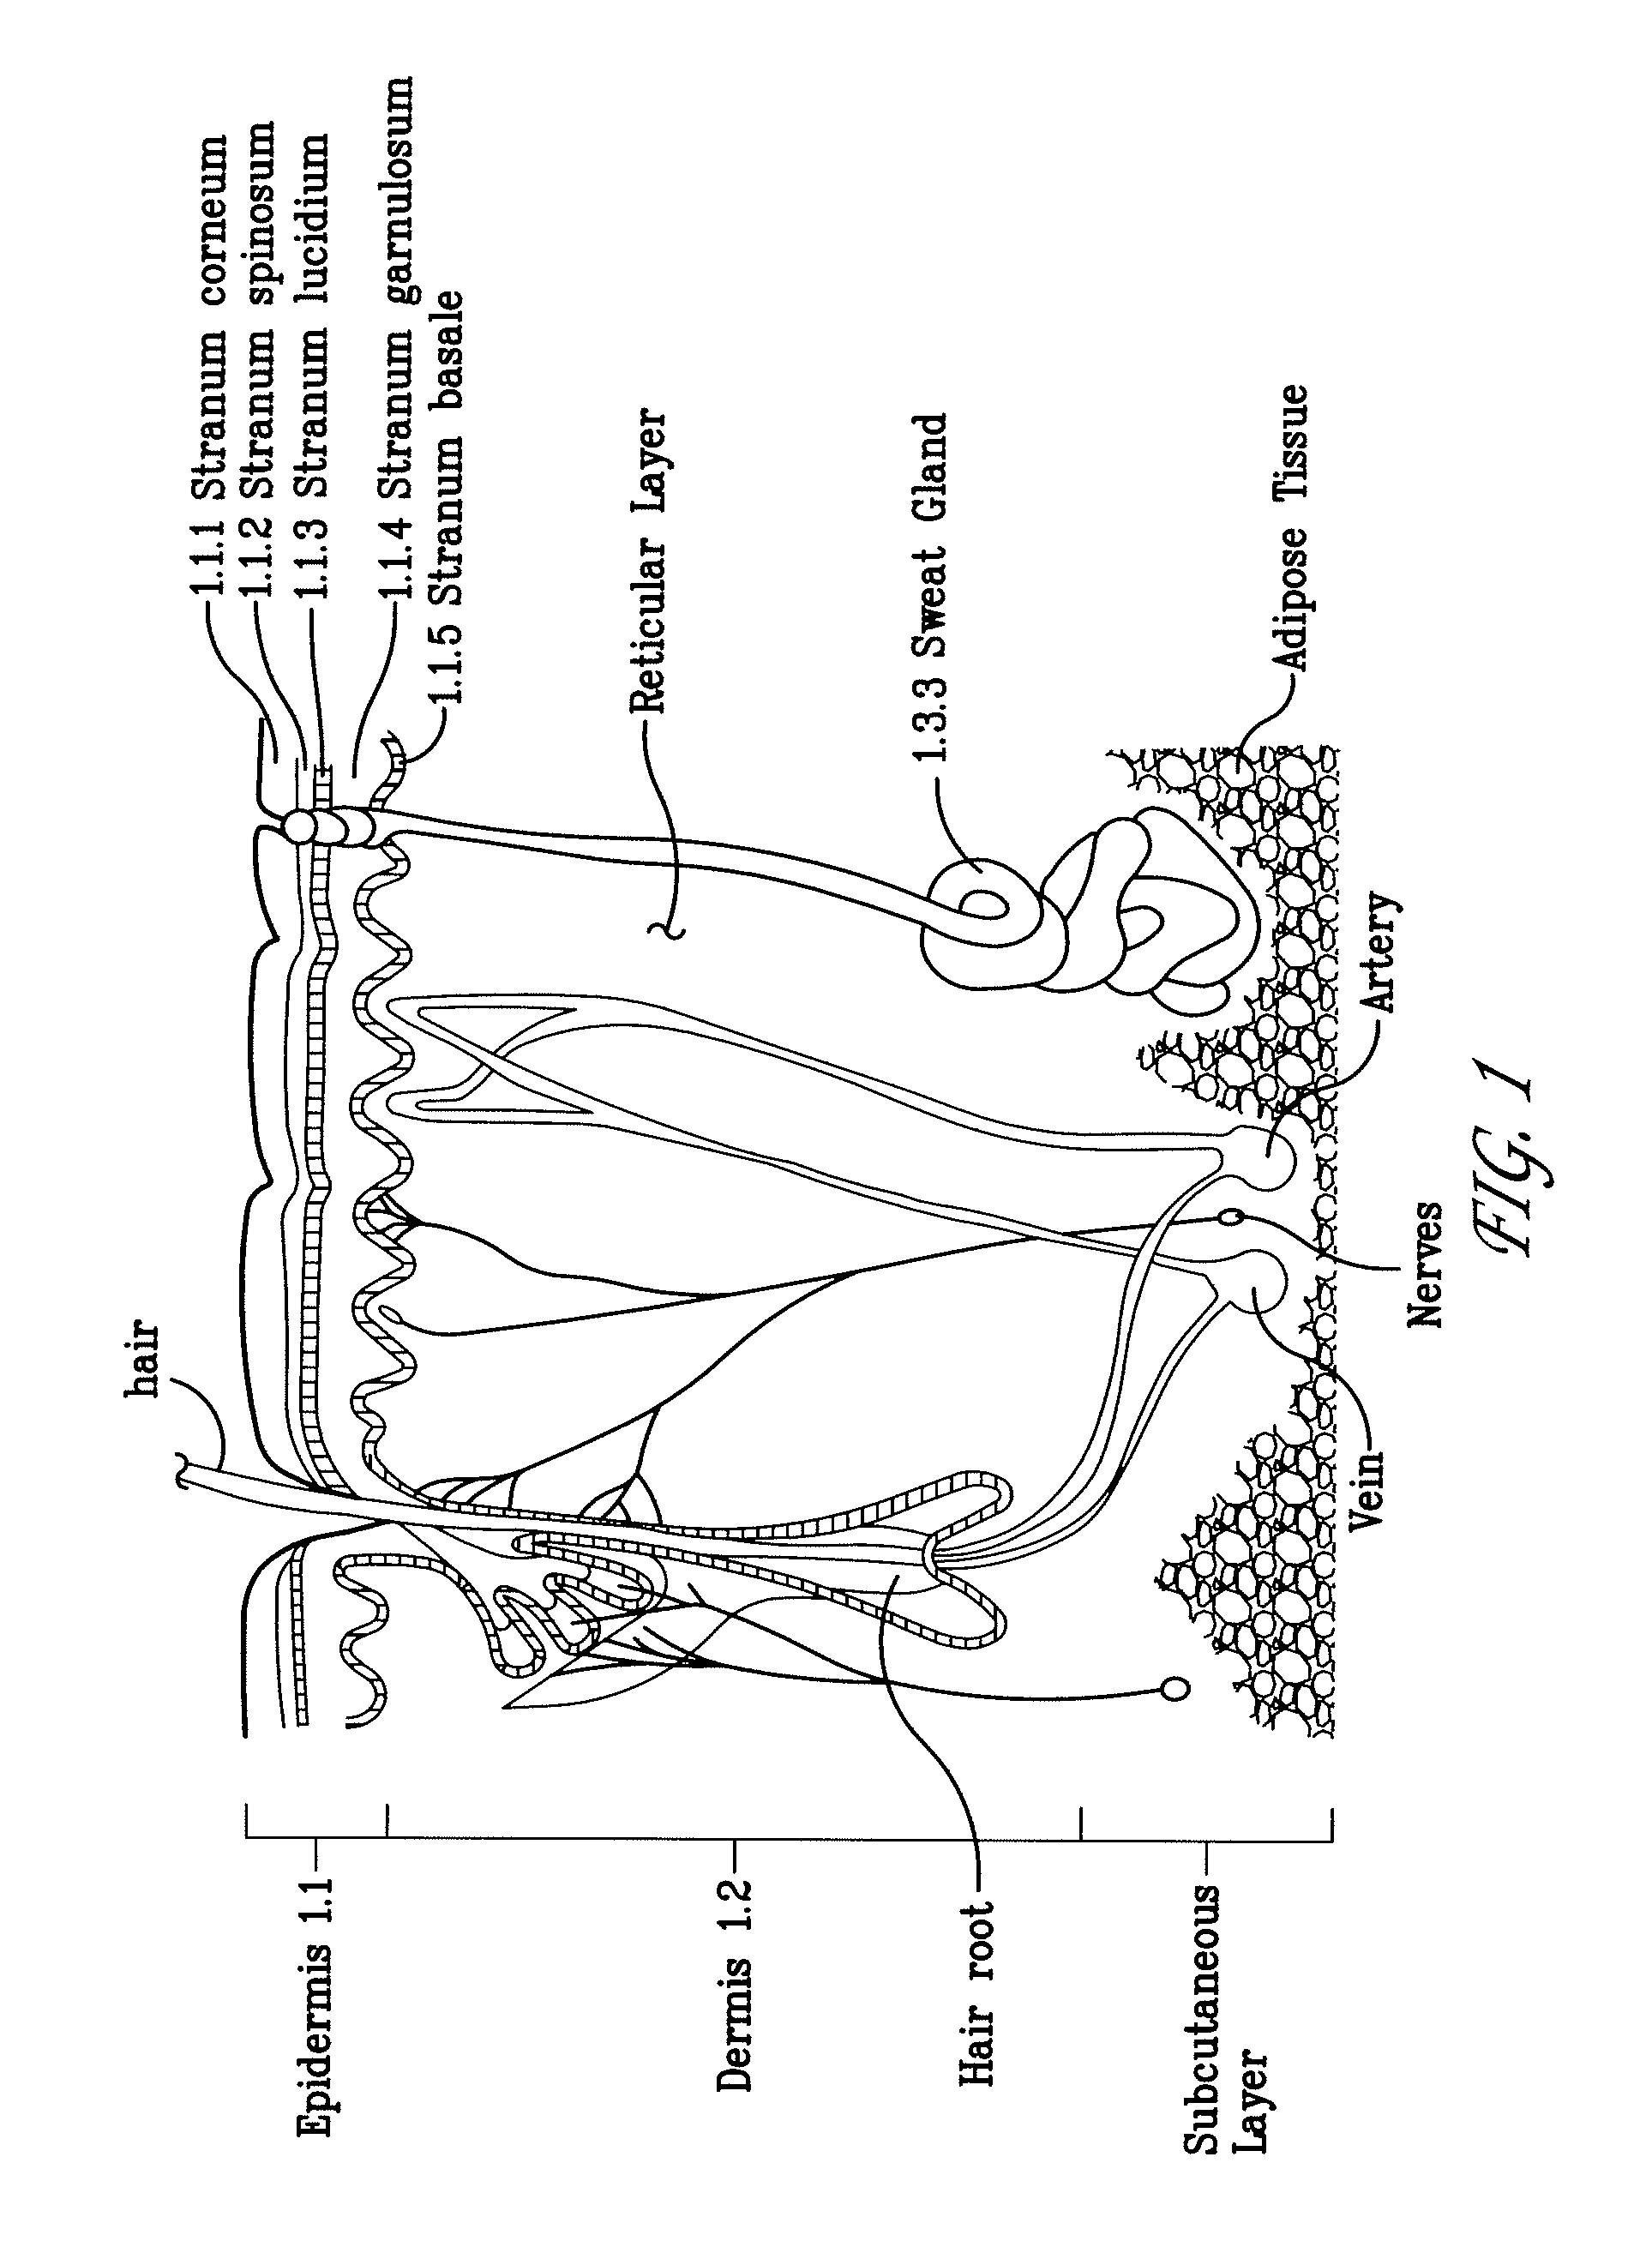 Electroporation devices and methods of using same for electroporation of cells in mammals